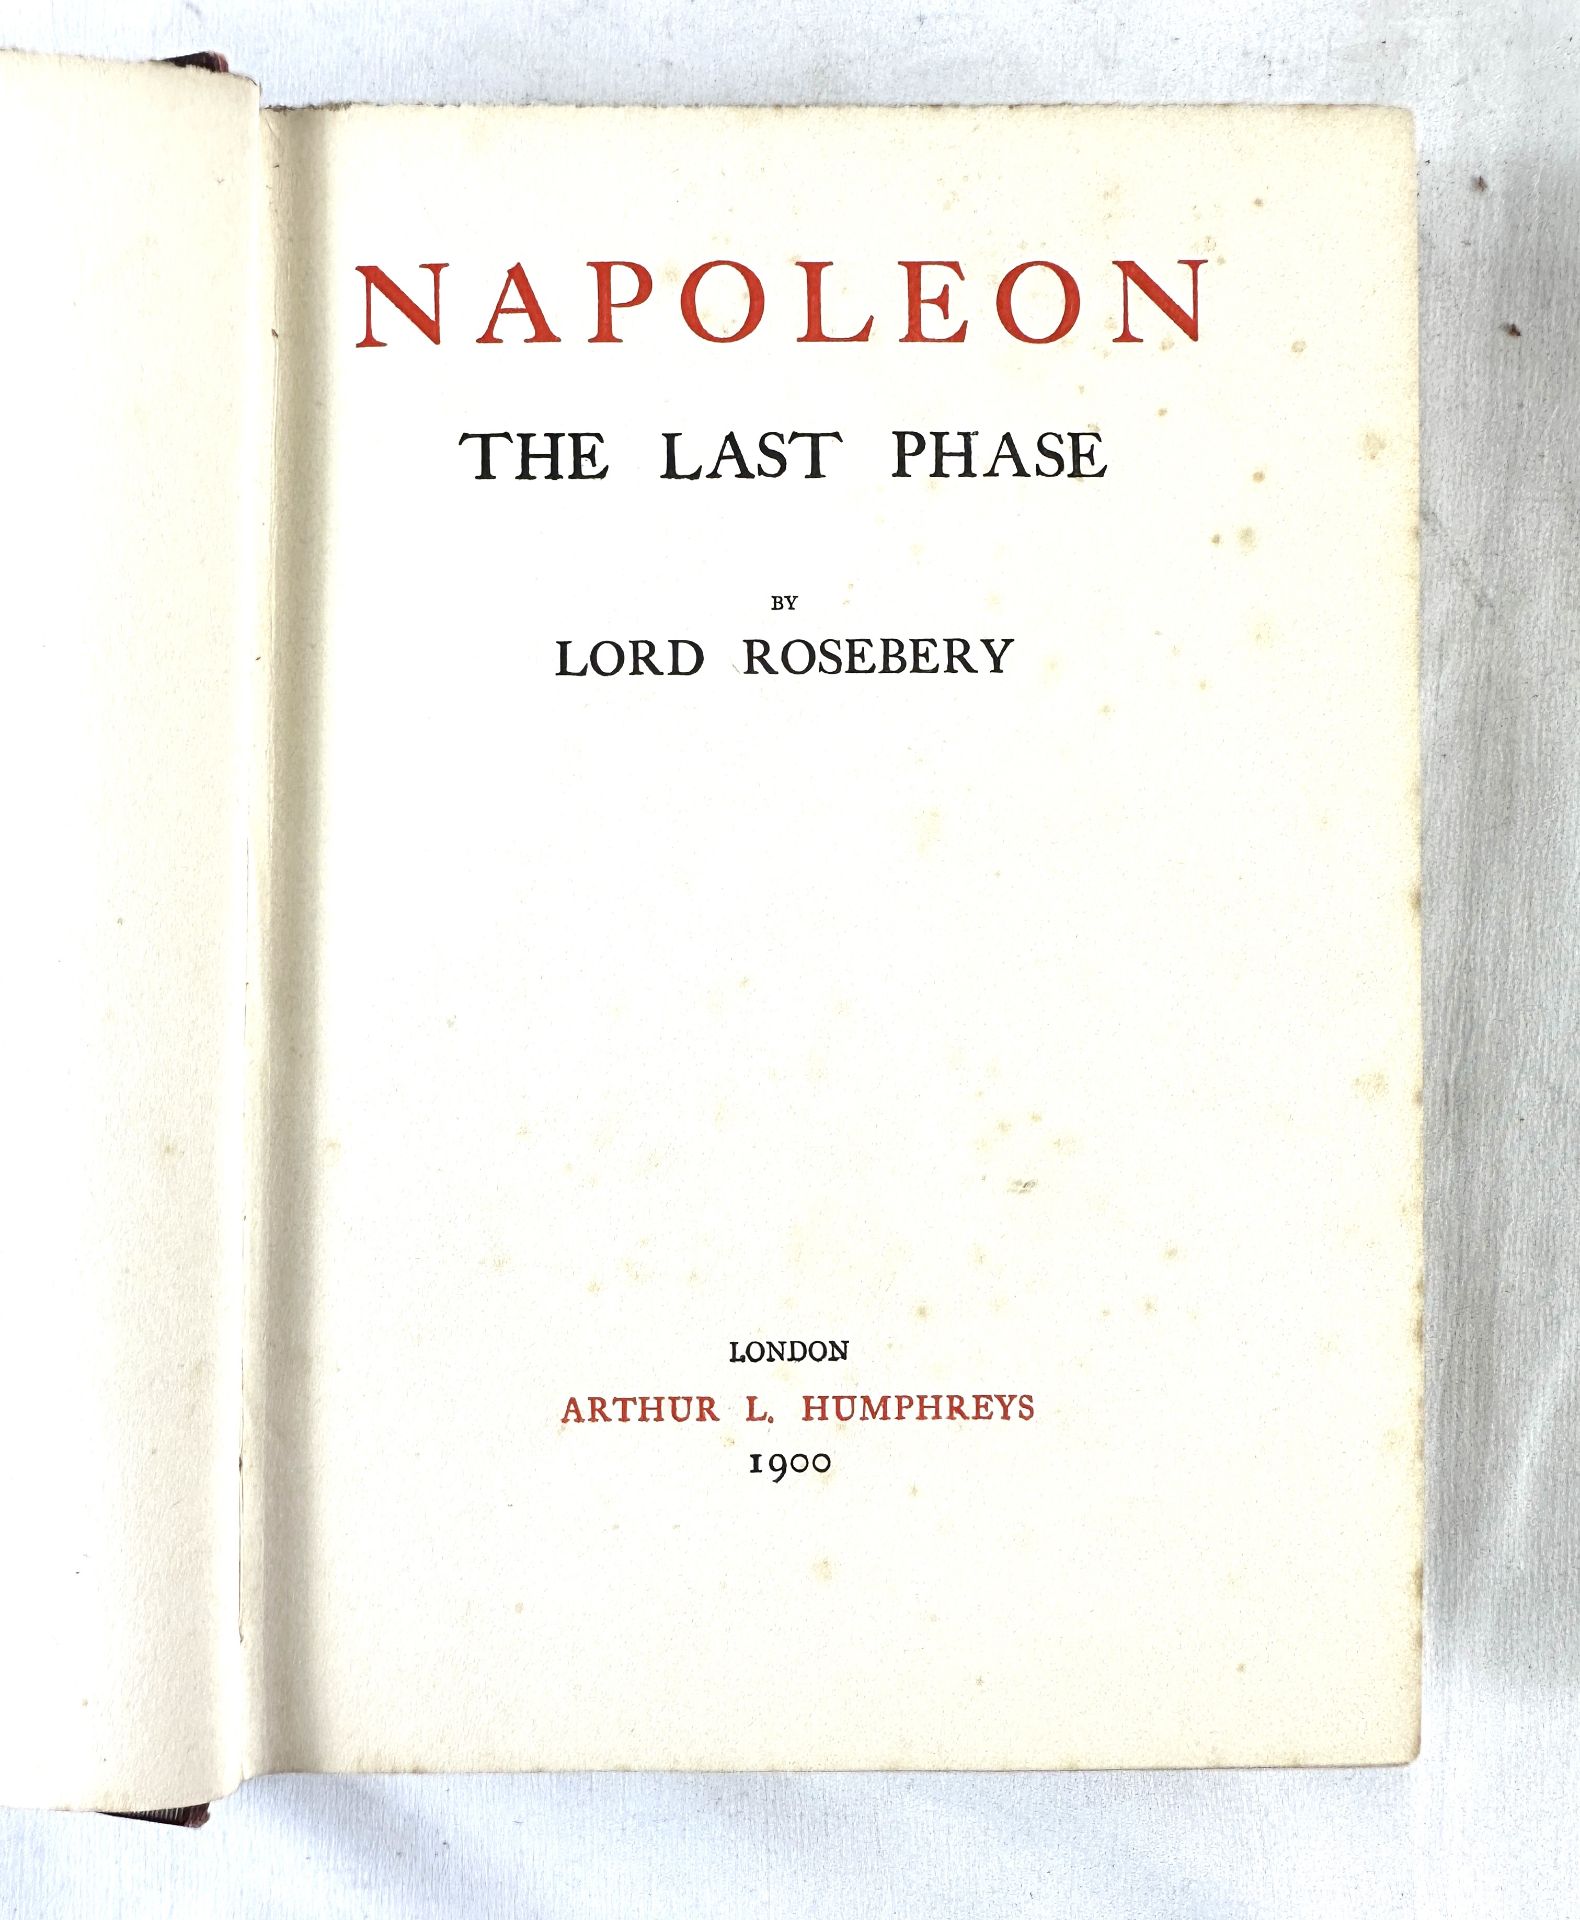 Napoleon The Last Phase by Lord Rosebery, 1900 and other books - Image 5 of 10